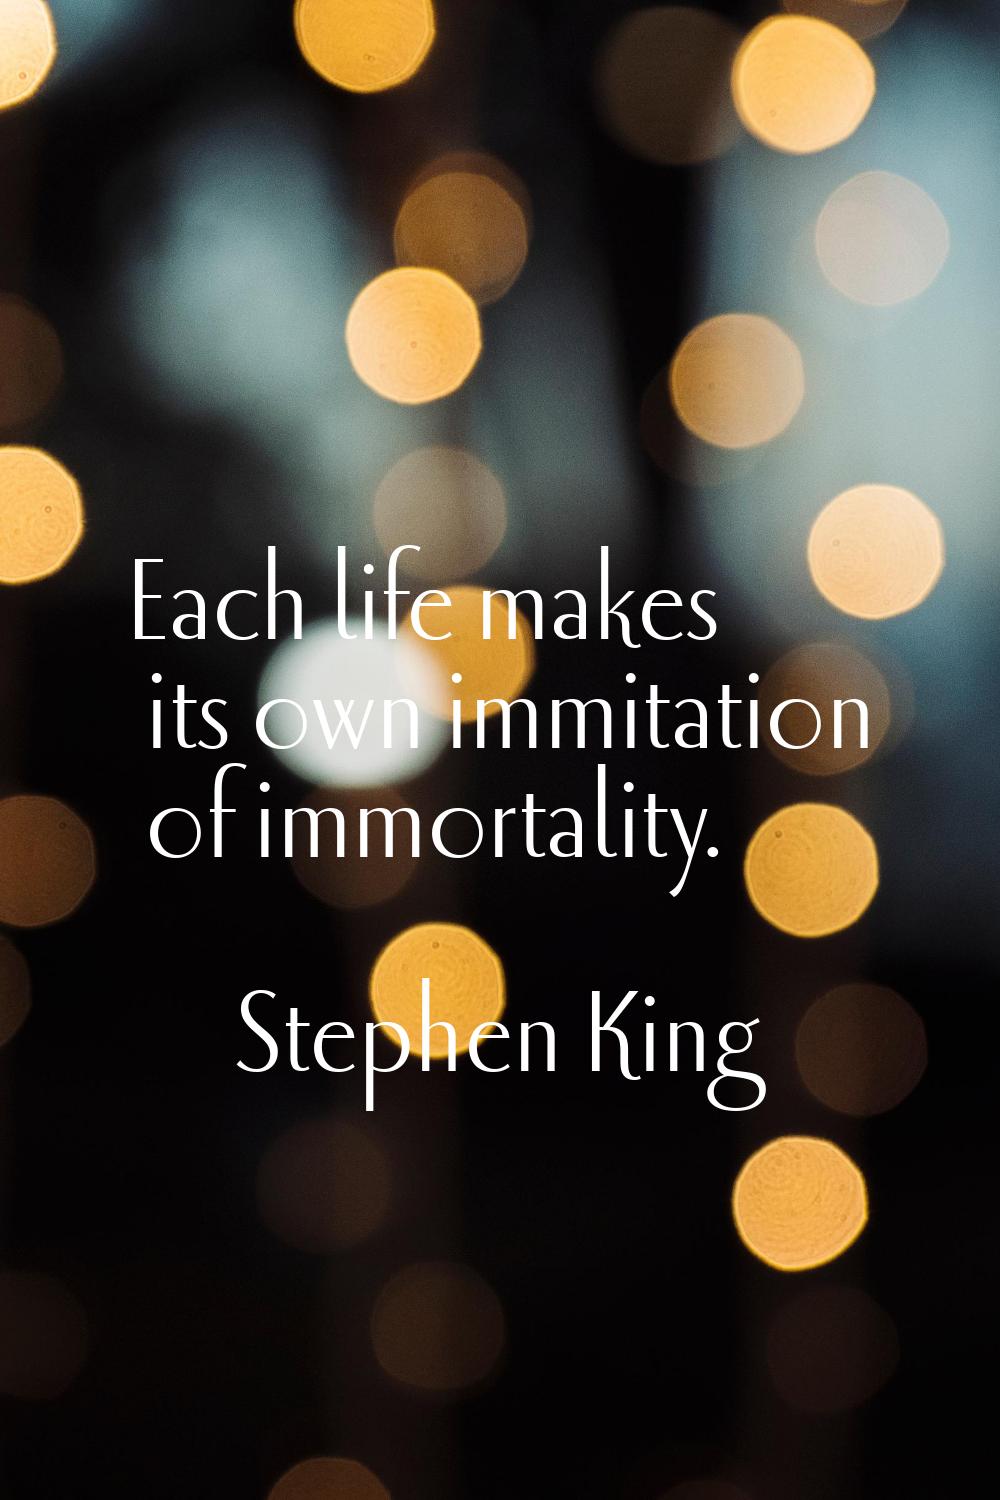 Each life makes its own immitation of immortality.